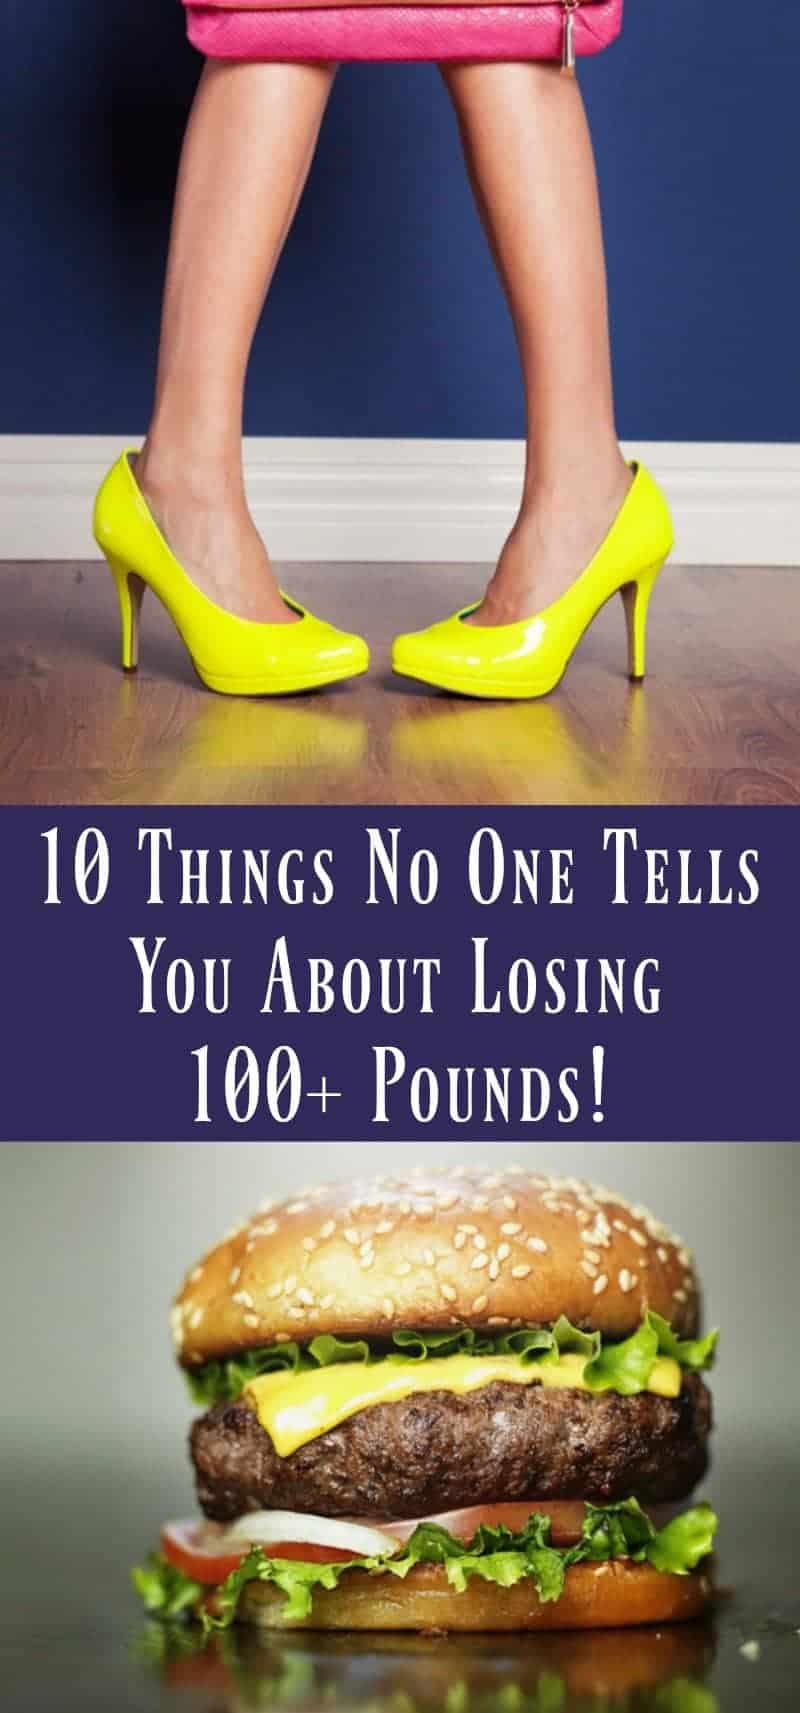 10 Things No One Tells You About Losing 100+ Pounds!